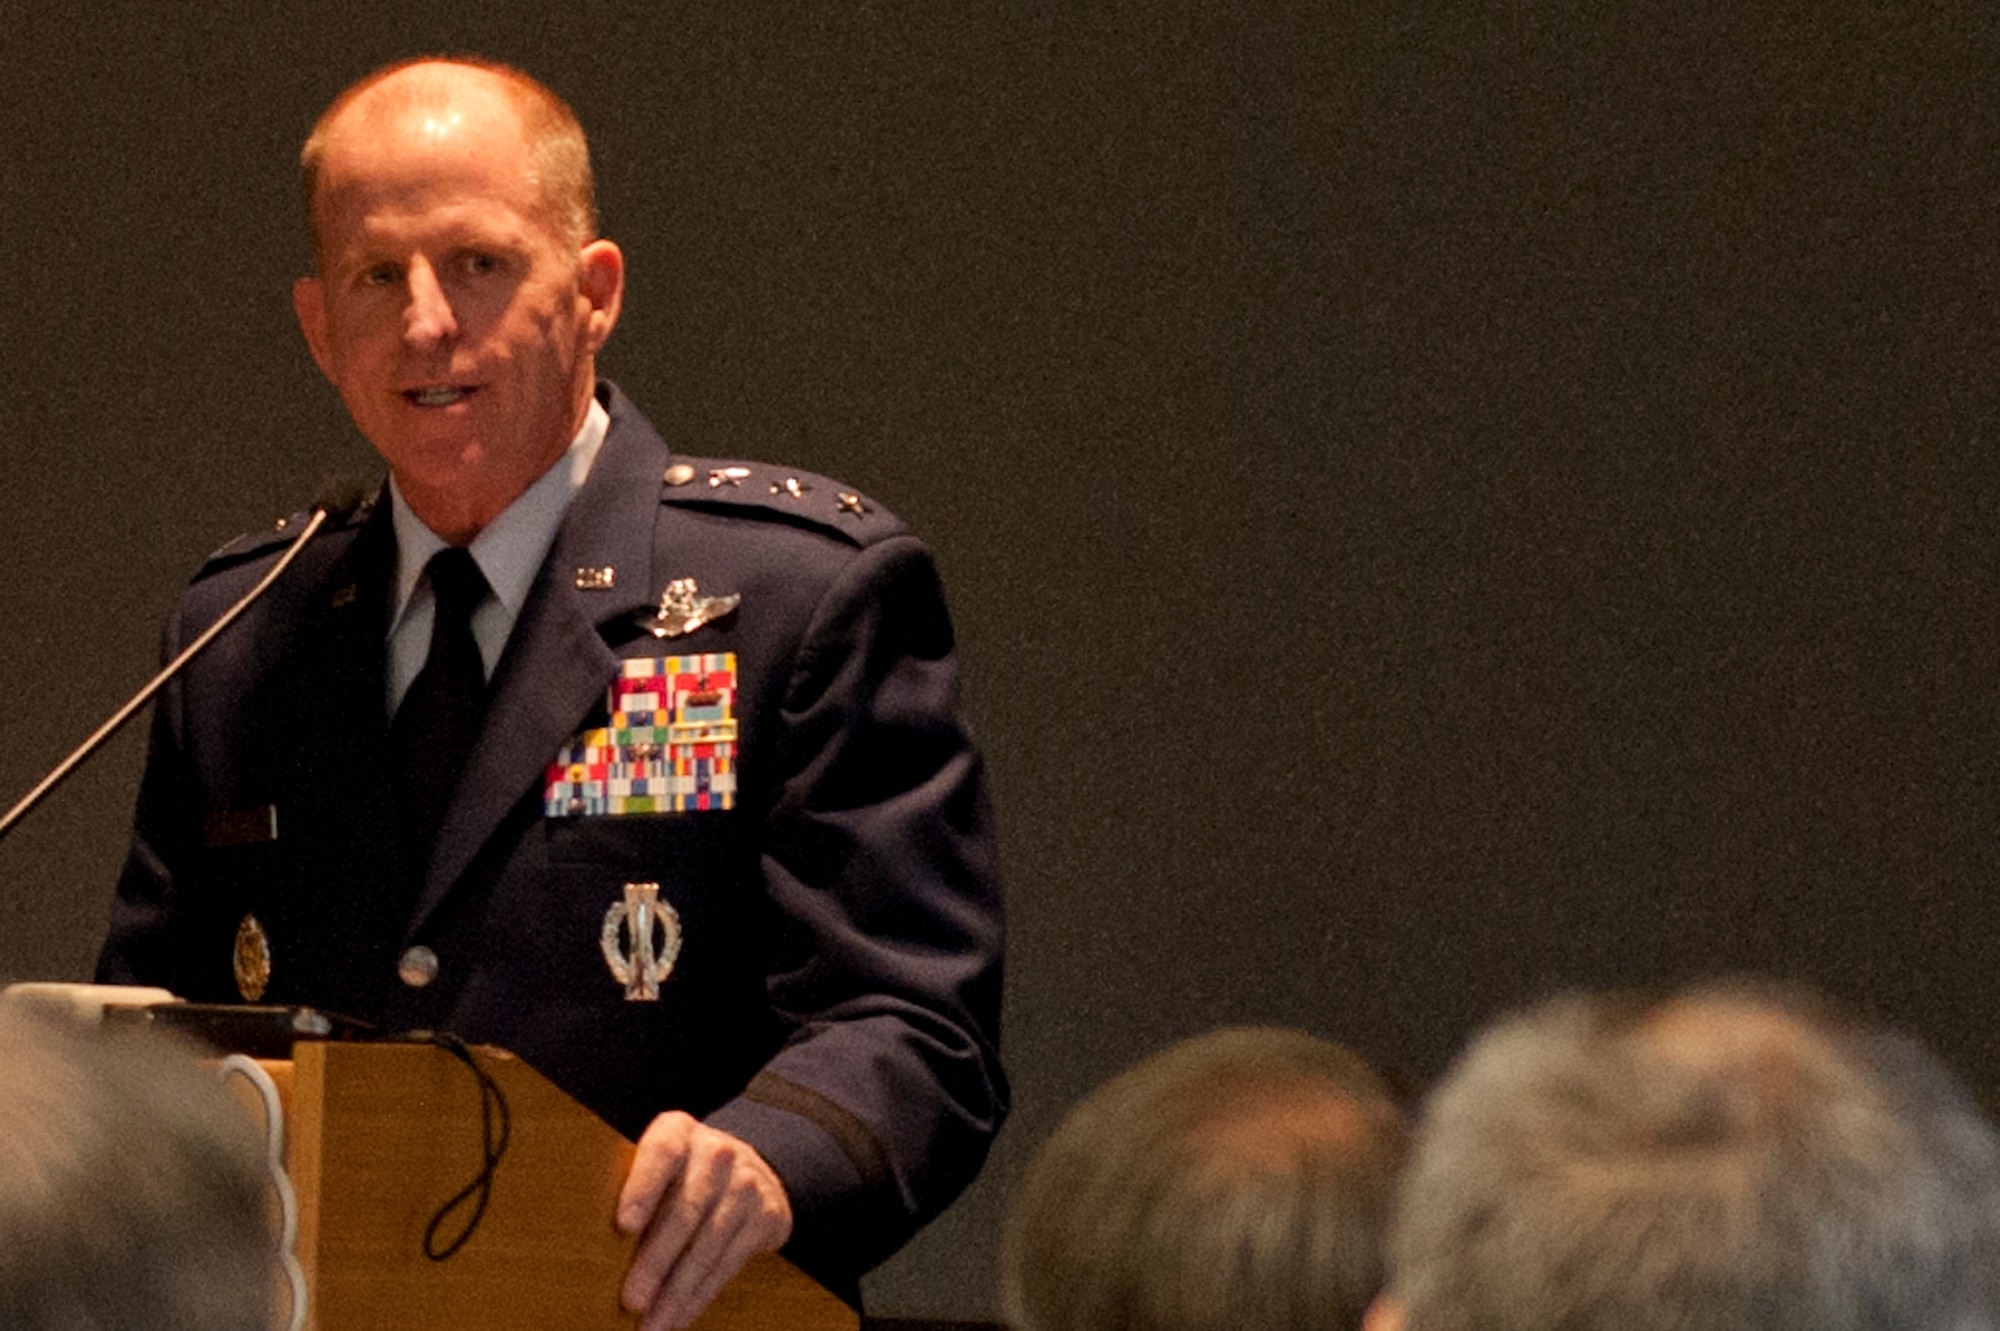 Lt. Gen. Stephen Wilson talks about changes to the nuclear enterprise during an Air Force Association event at the AFA Headquarters Building June 24, 2014, in Washington, D.C. The largest change Wilson said to expect is a shift in culture, brought on by the recent results of the Force Improvement Program implemented in April. Wilson is the commander of Air Force Global Strike Command. (U.S. Air Force photo/Staff Sgt. Torri Ingalsbe)